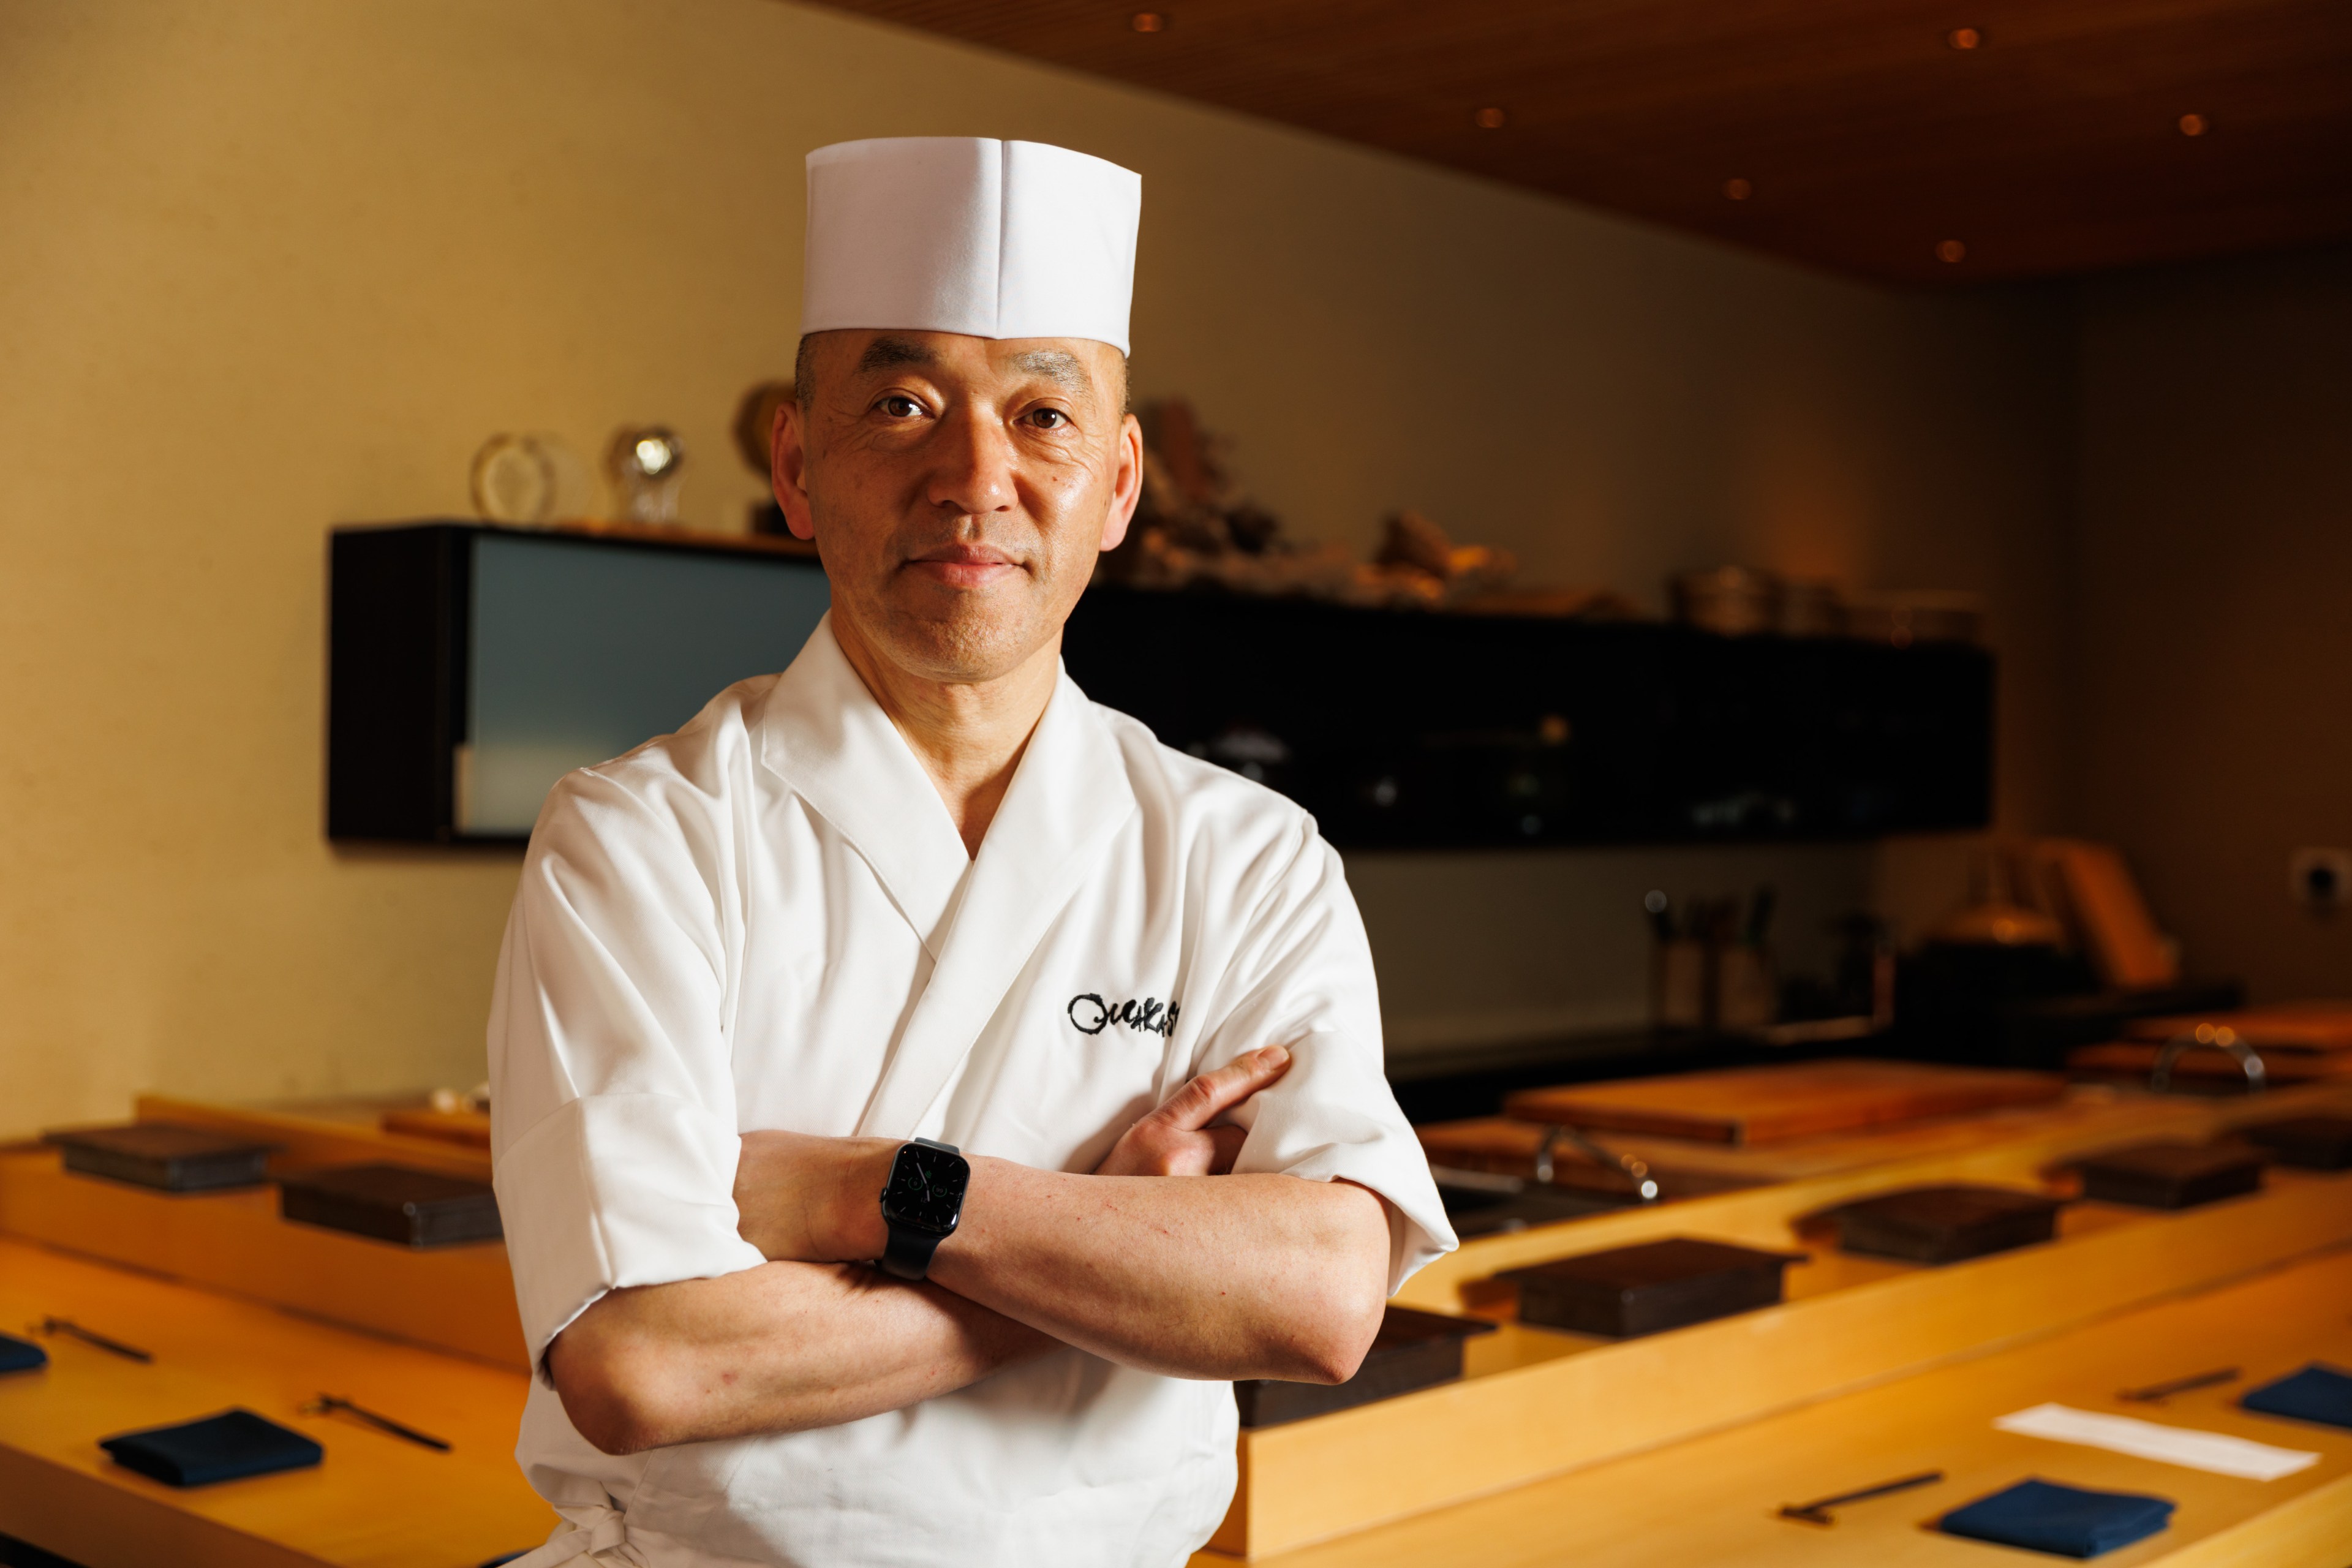 A chef in a white uniform and tall hat stands confidently with arms crossed in a warmly-lit, minimalist kitchen, with wooden countertops and shelves in the background.